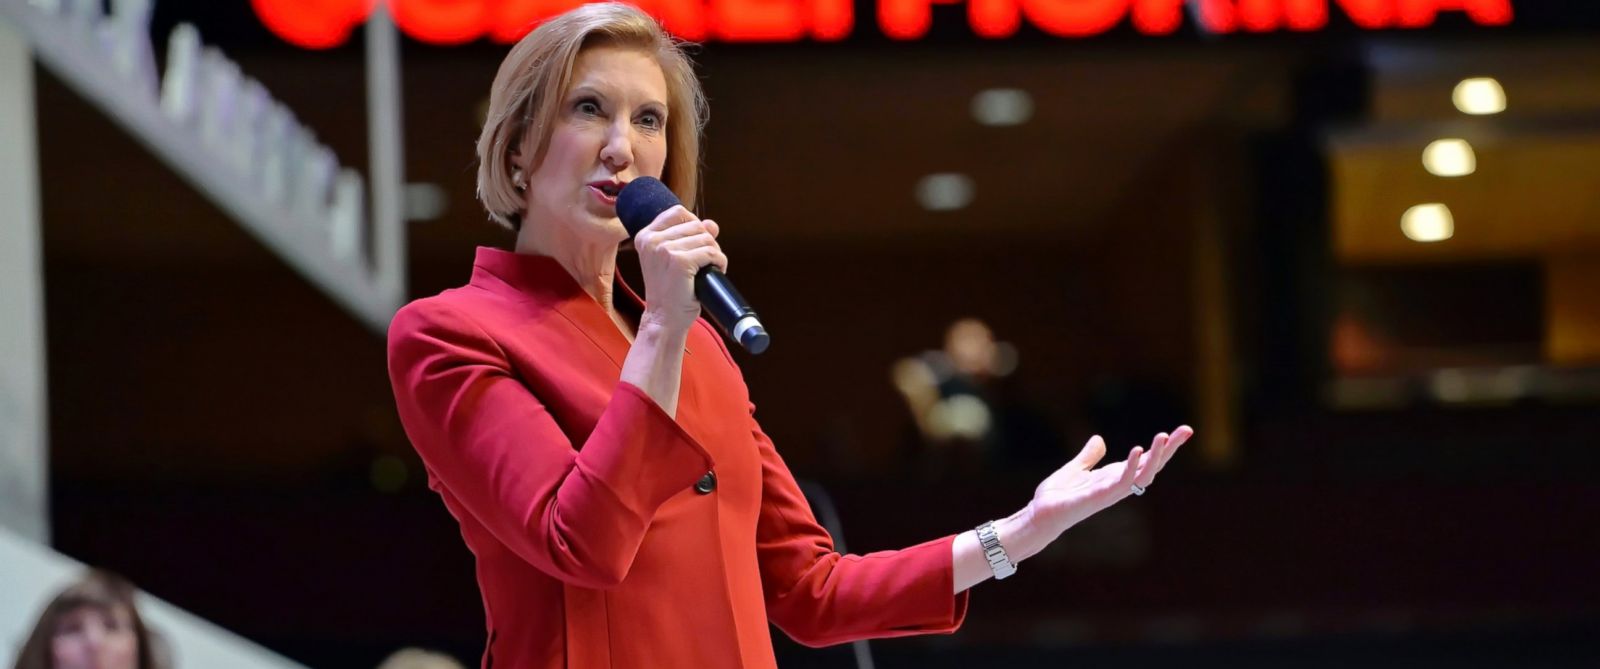 PHOTO: Republican presidential candidate Carly Fiorina speaks at a presidential forum sponsored by Heritage Action at the Bon Secours Wellness Arena, Sept. 18, 2015, in Greenville, S.C.